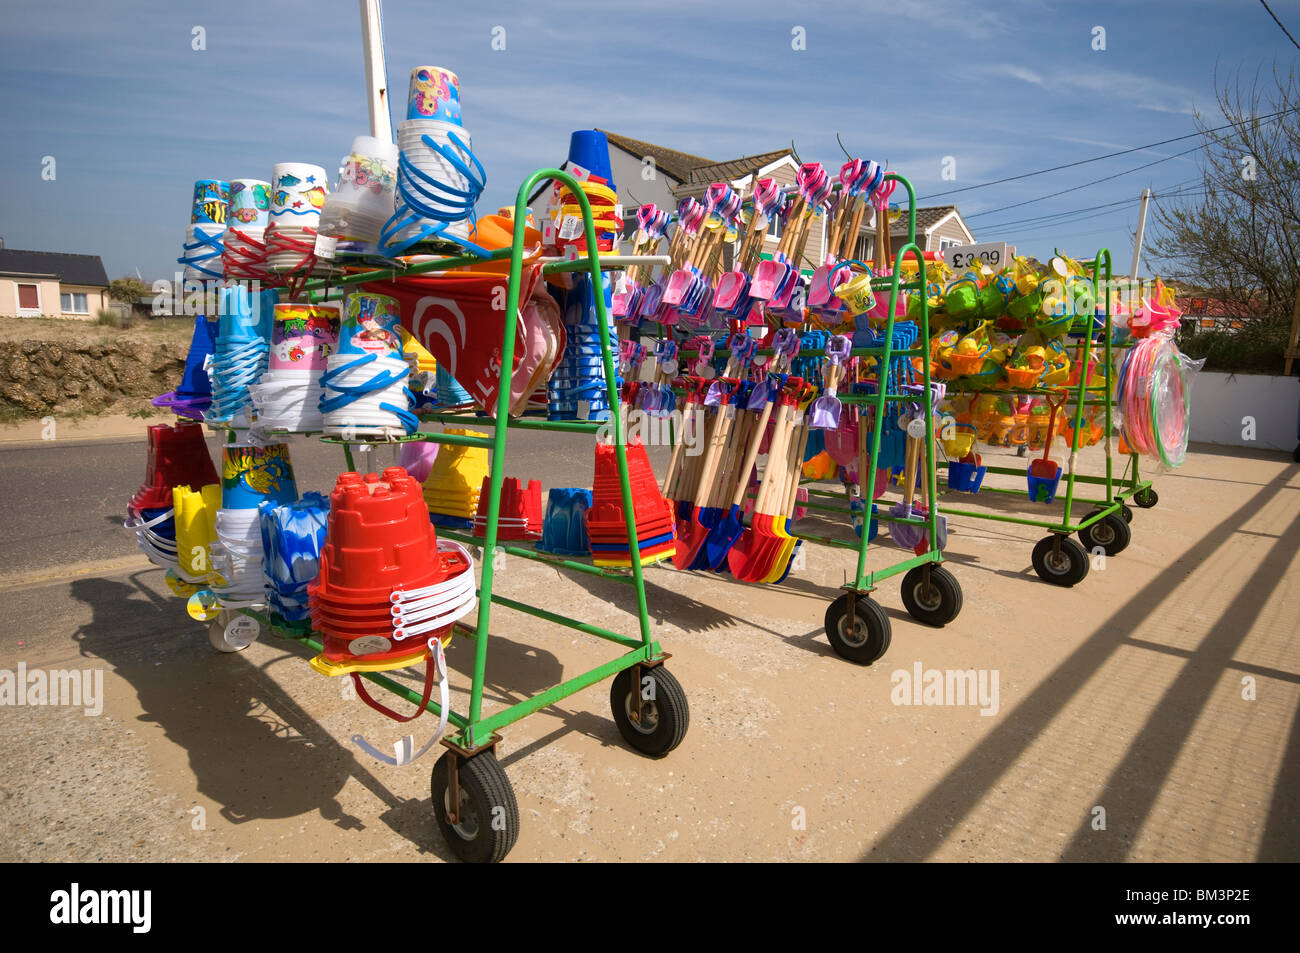 beach goods and toys for sale in racks at shop Camber Sands Beach in East Sussex england uk Stock Photo